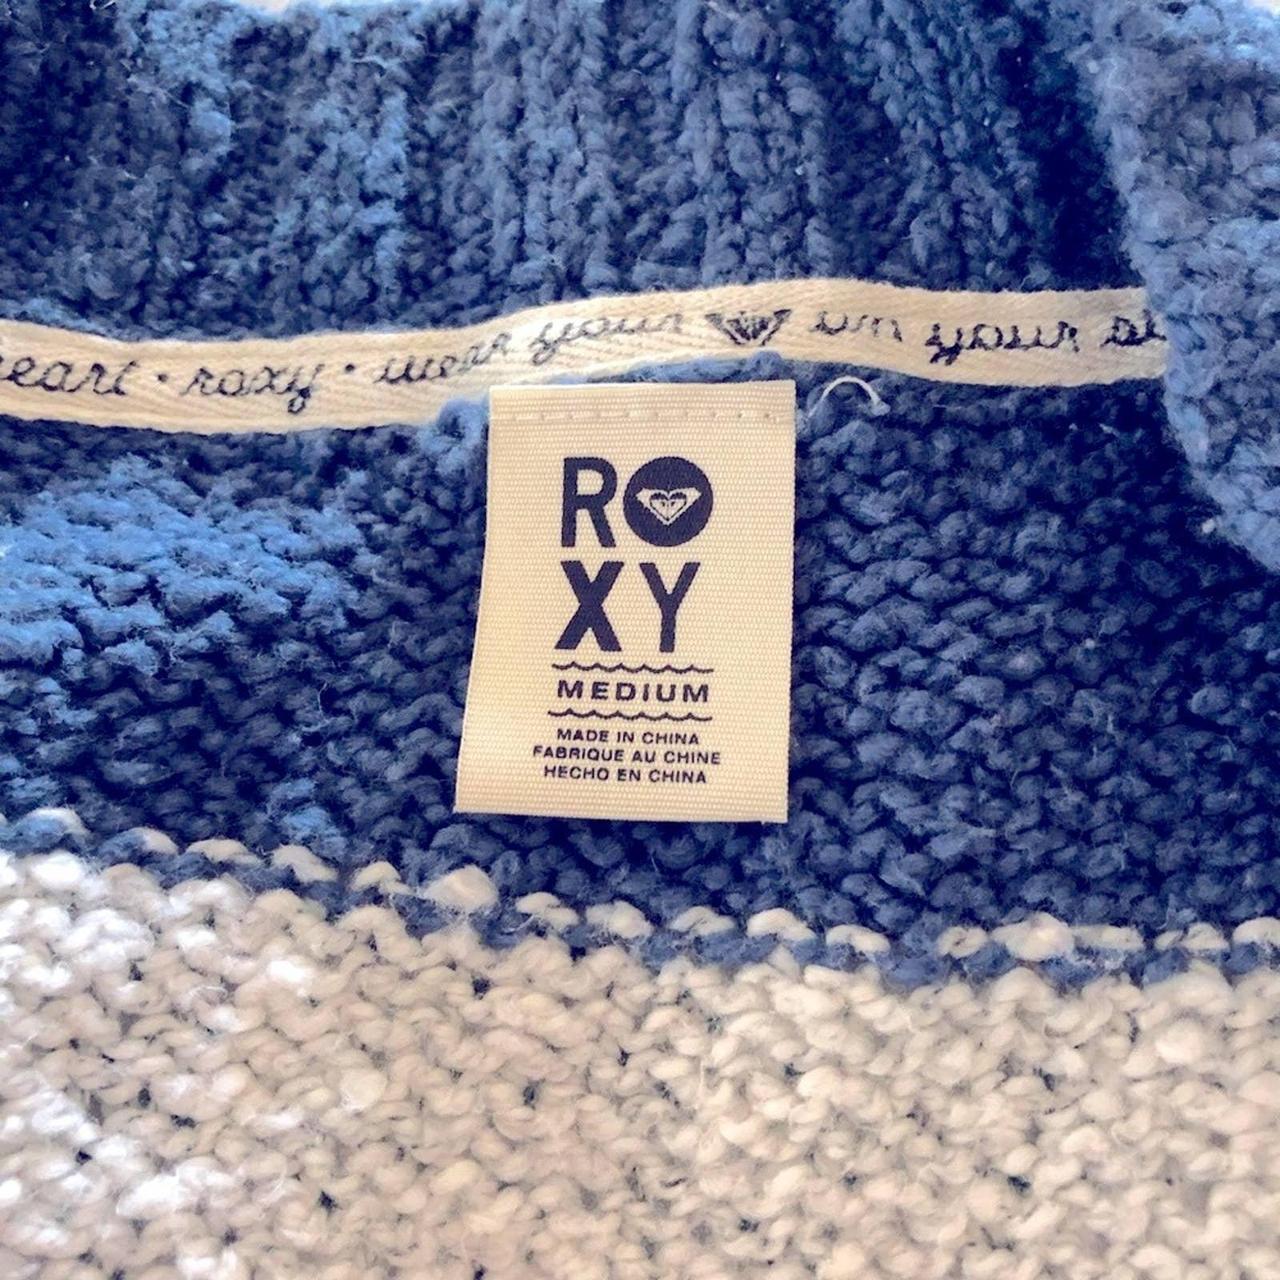 Roxy blue and white striped cardigan sweater - Depop